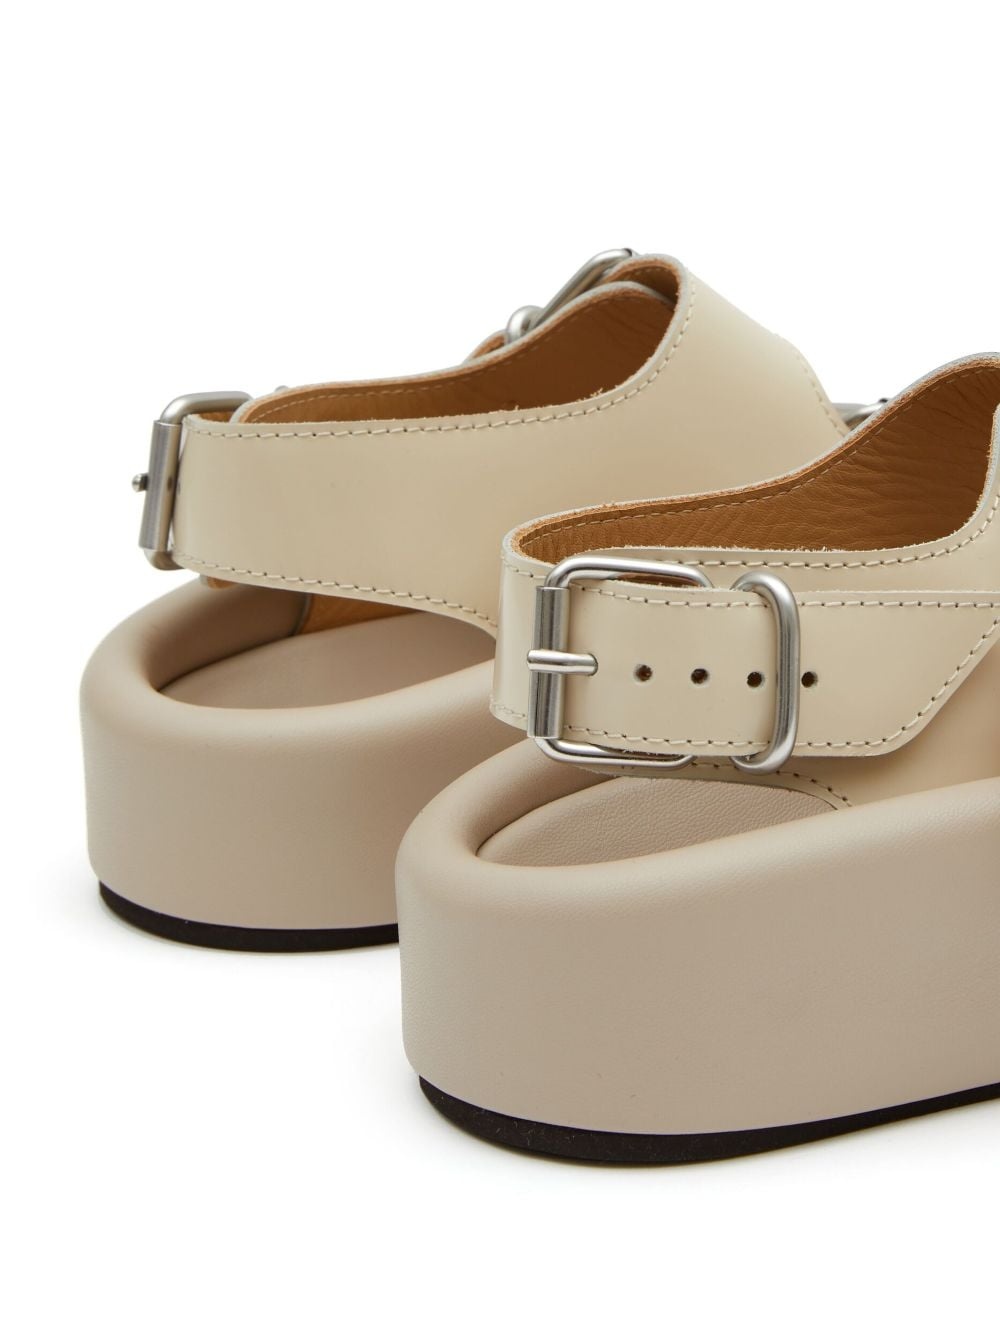 open-toe buckled sandals - 4